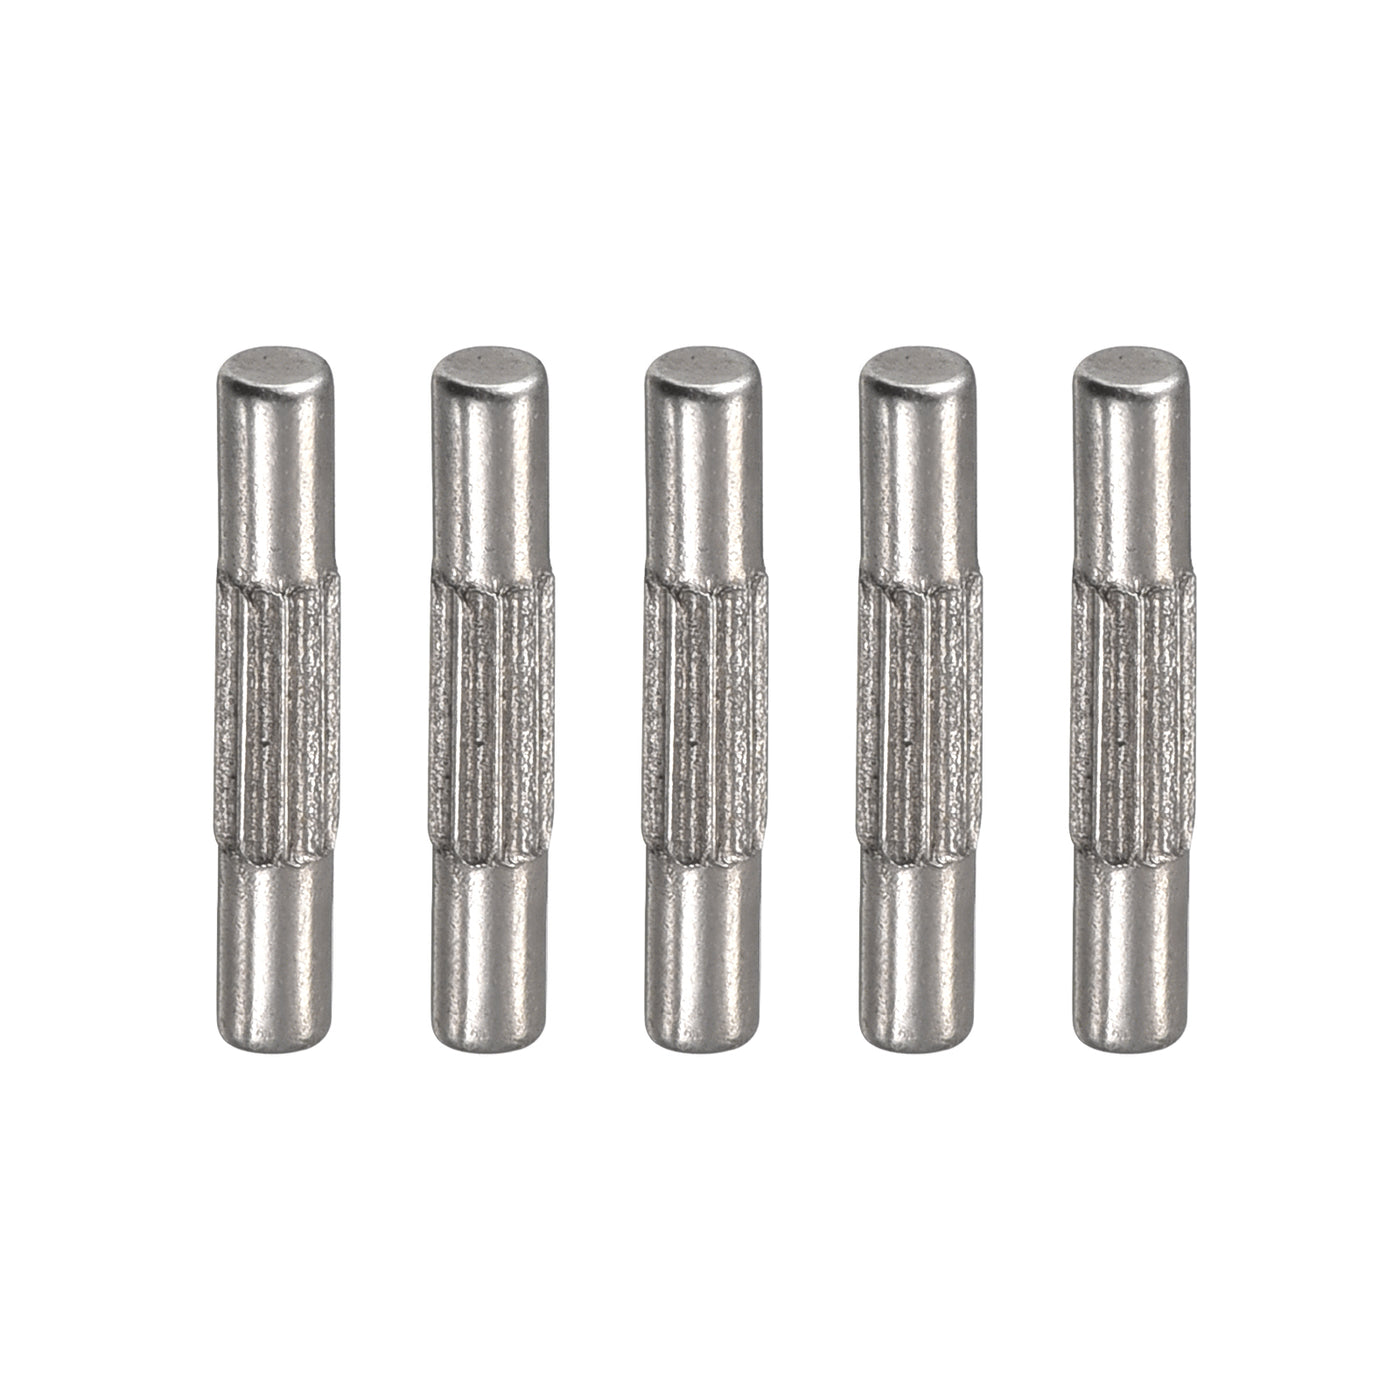 uxcell Uxcell 2x12mm 304 Stainless Steel Dowel Pins, 5Pcs Center Knurled Chamfered End Pin